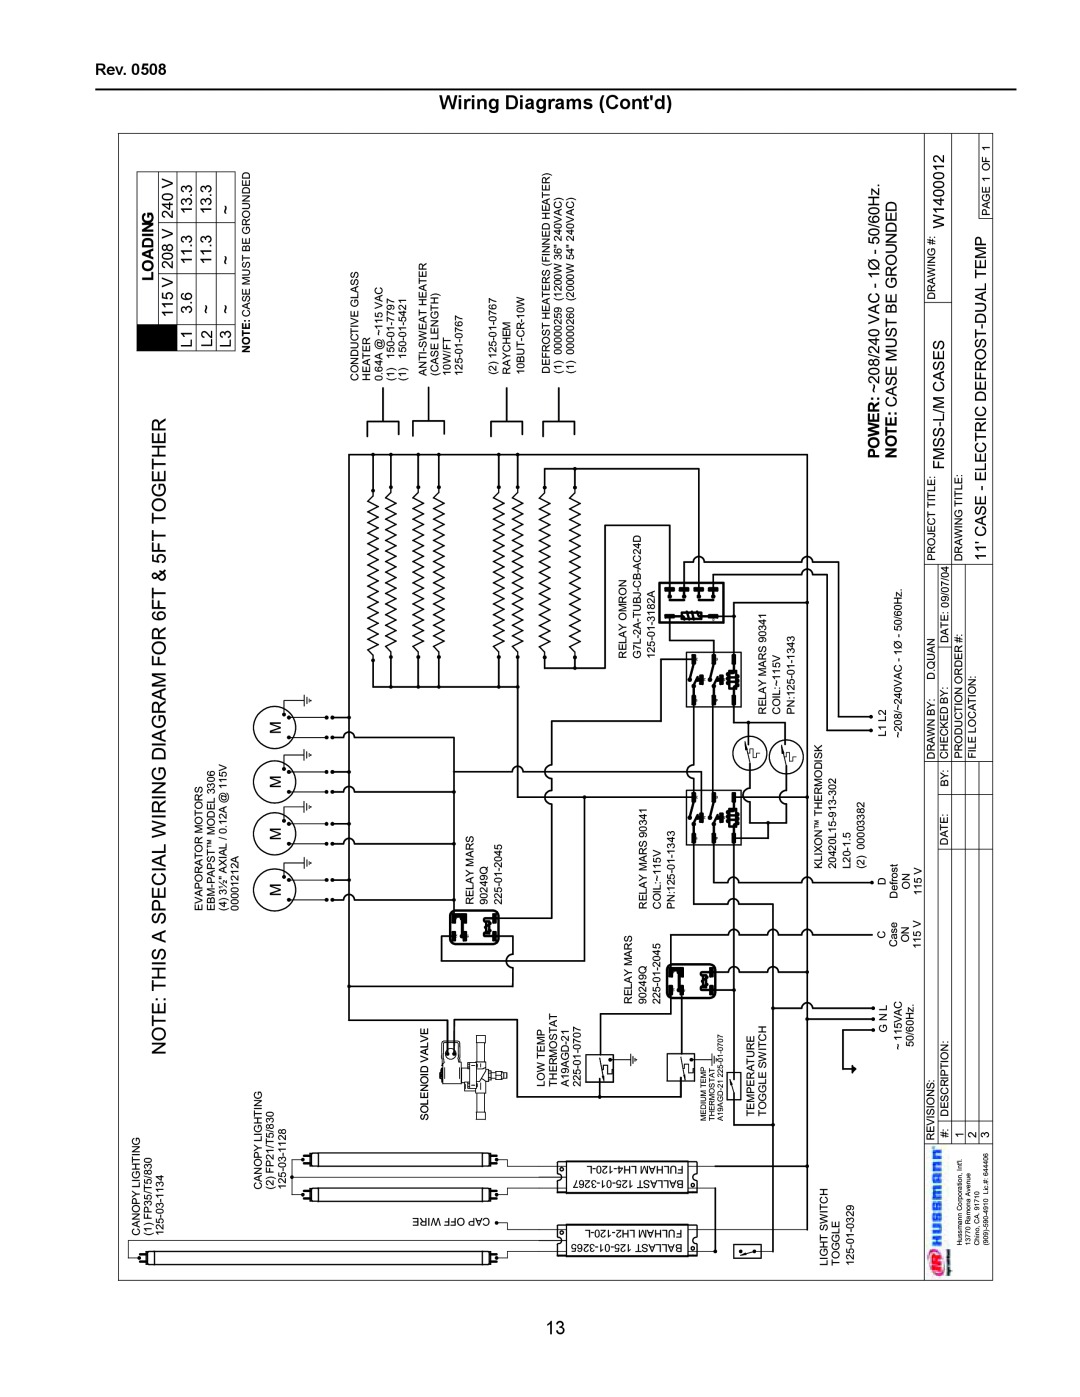 hussman FMSS-L Contd, Wiring Diagrams, NOTE THIS A SPECIAL WIRING DIAGRAM FOR 6FT & 5FT TOGETHER, Loading, Solenoid Valve 